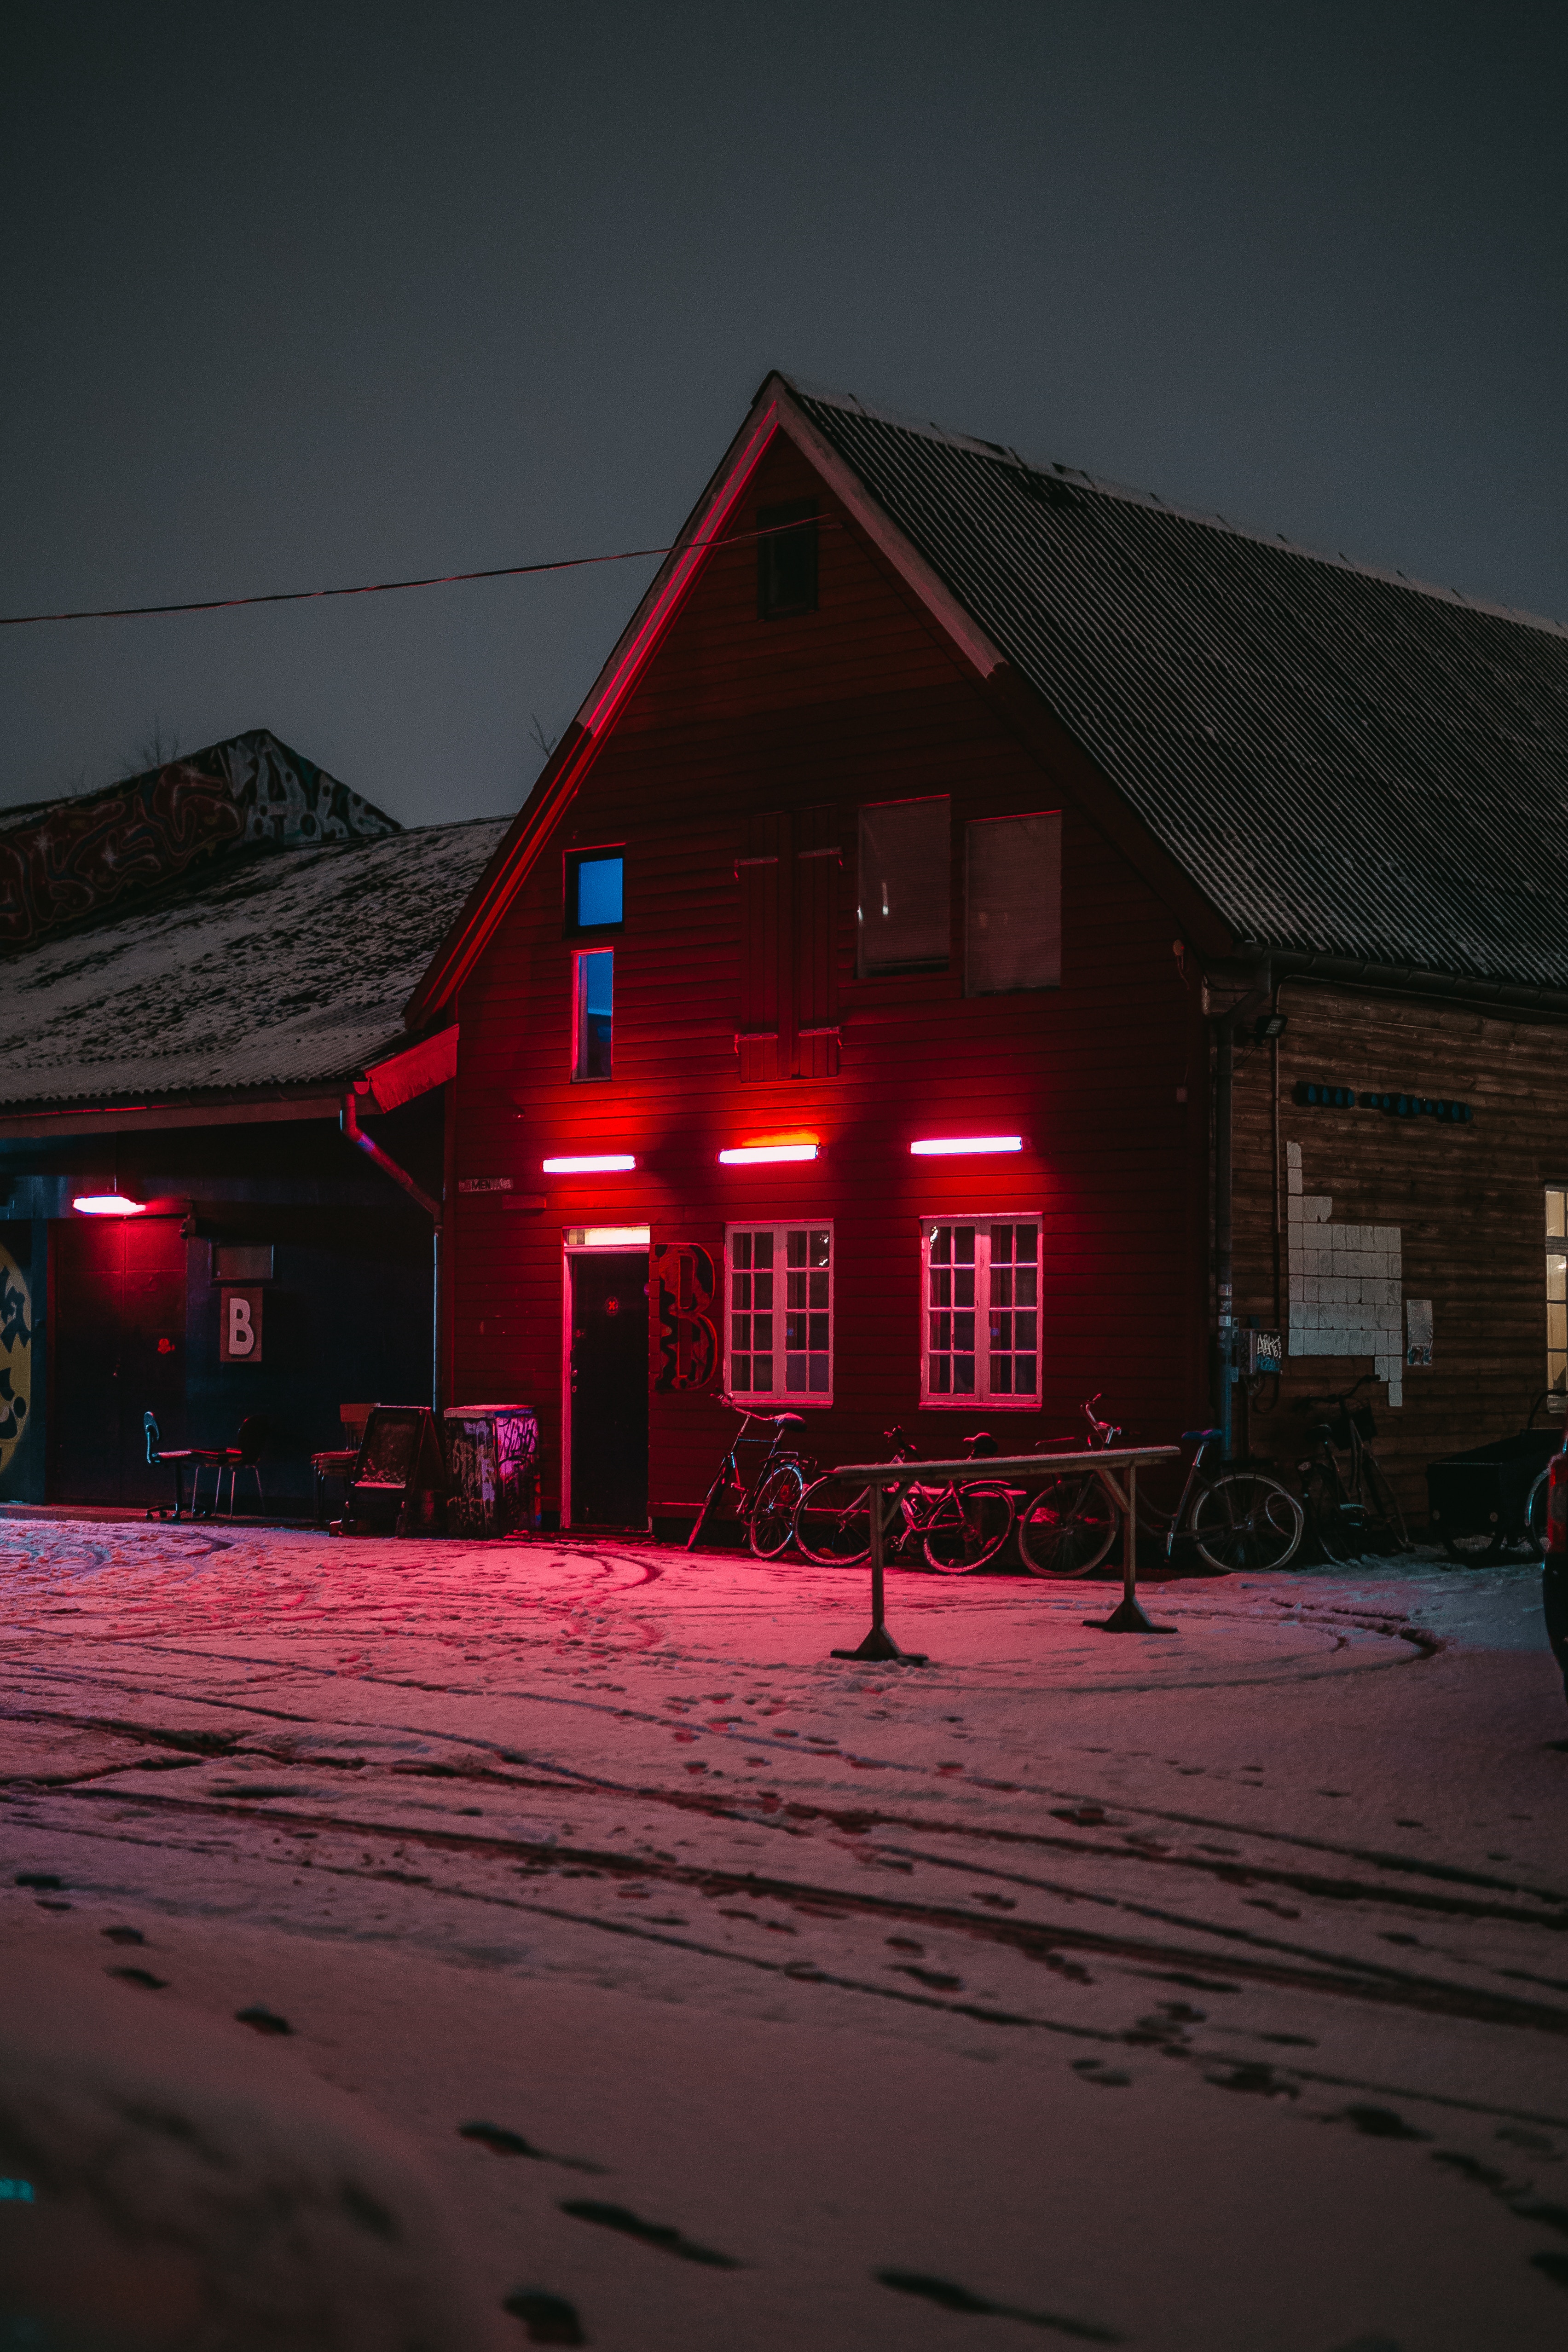 78571 download wallpaper dark, winter, bicycles, red, shine, light, small house, lodge screensavers and pictures for free